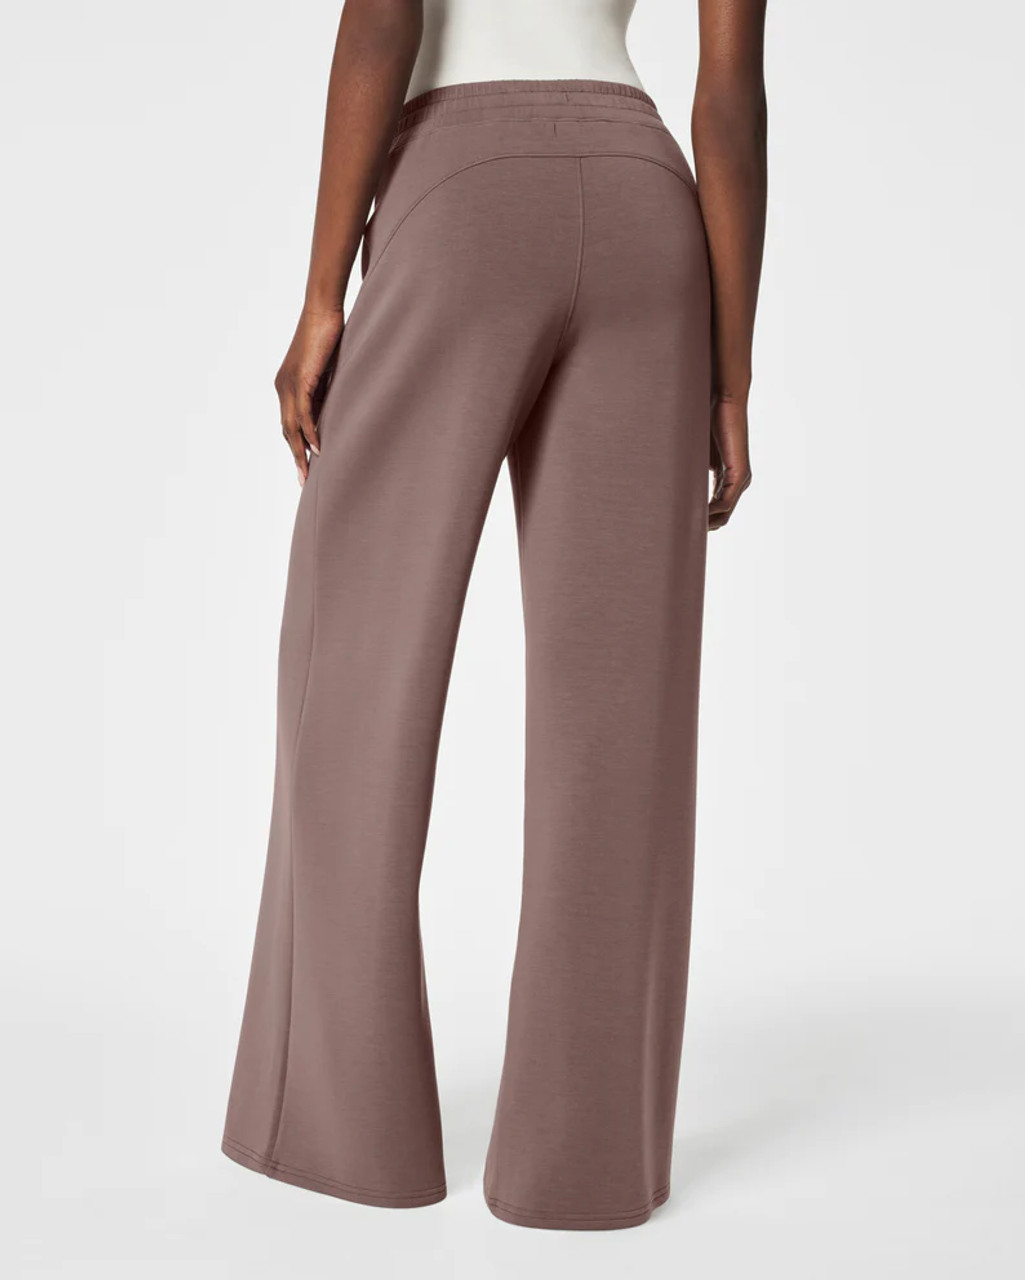 Meet Smoke: Our new AirEssentials must-have shade for 2024. Pair with the  matching #AirEssentials Wide Leg Pant or our fan-favorite Booty